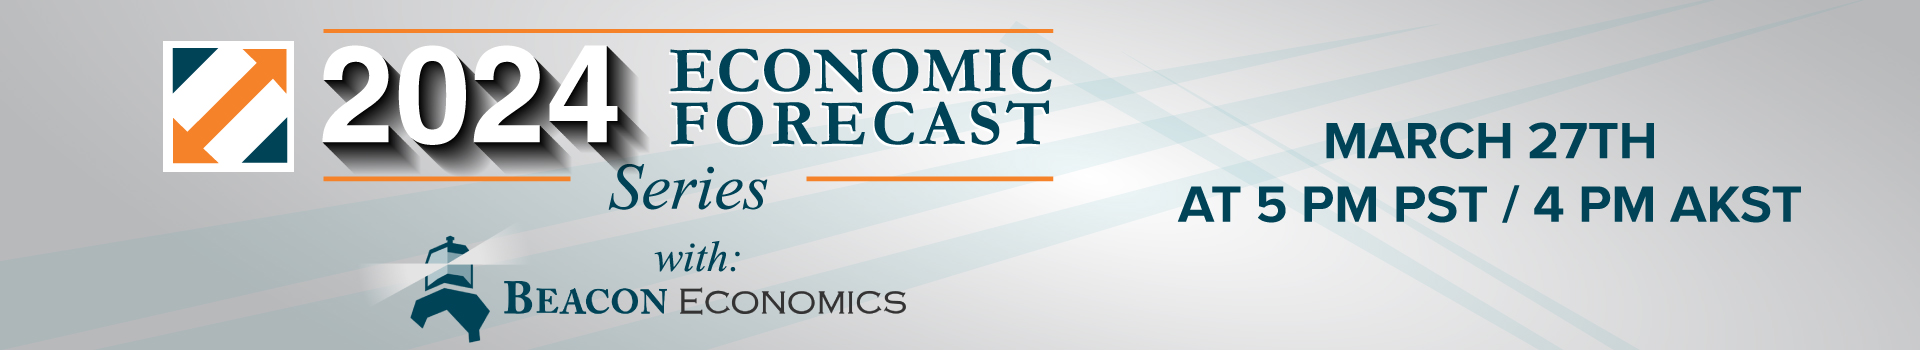 2024 Economic Forecast Series March 27th